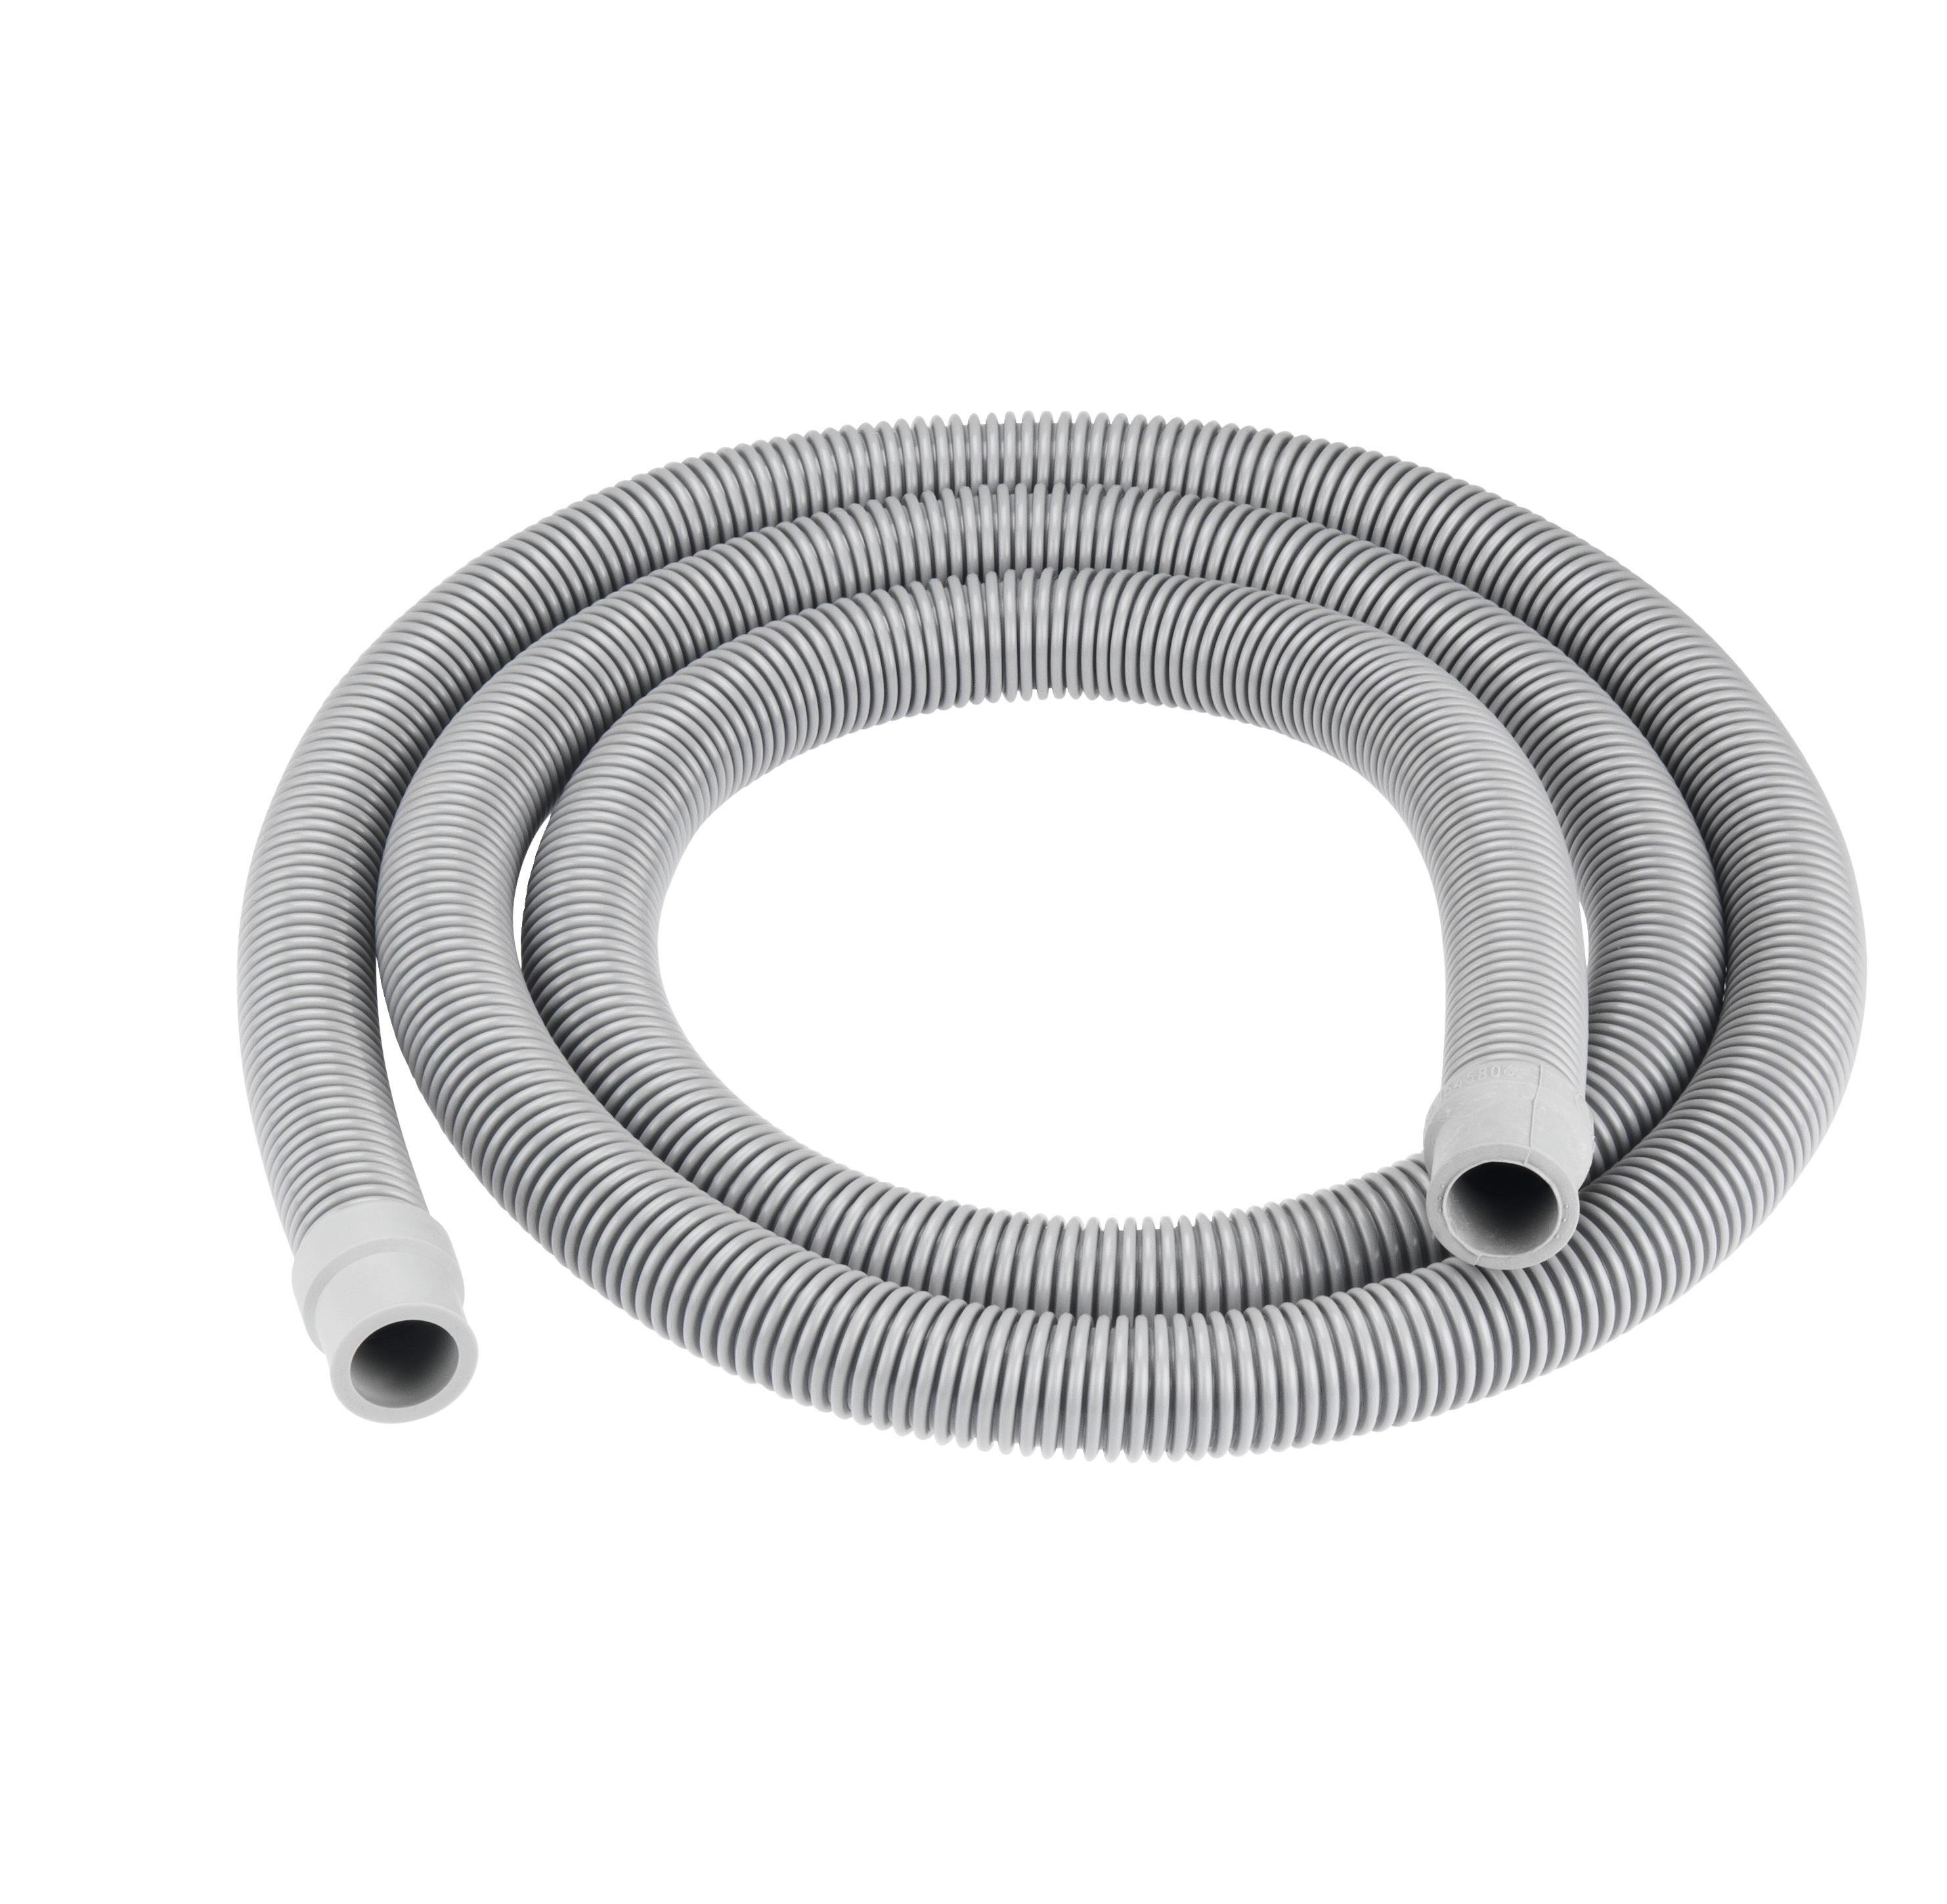 MIELE Washing Machine Drain Hose Washer Dryer Outlet Water Pipe 4m 19  22mm 